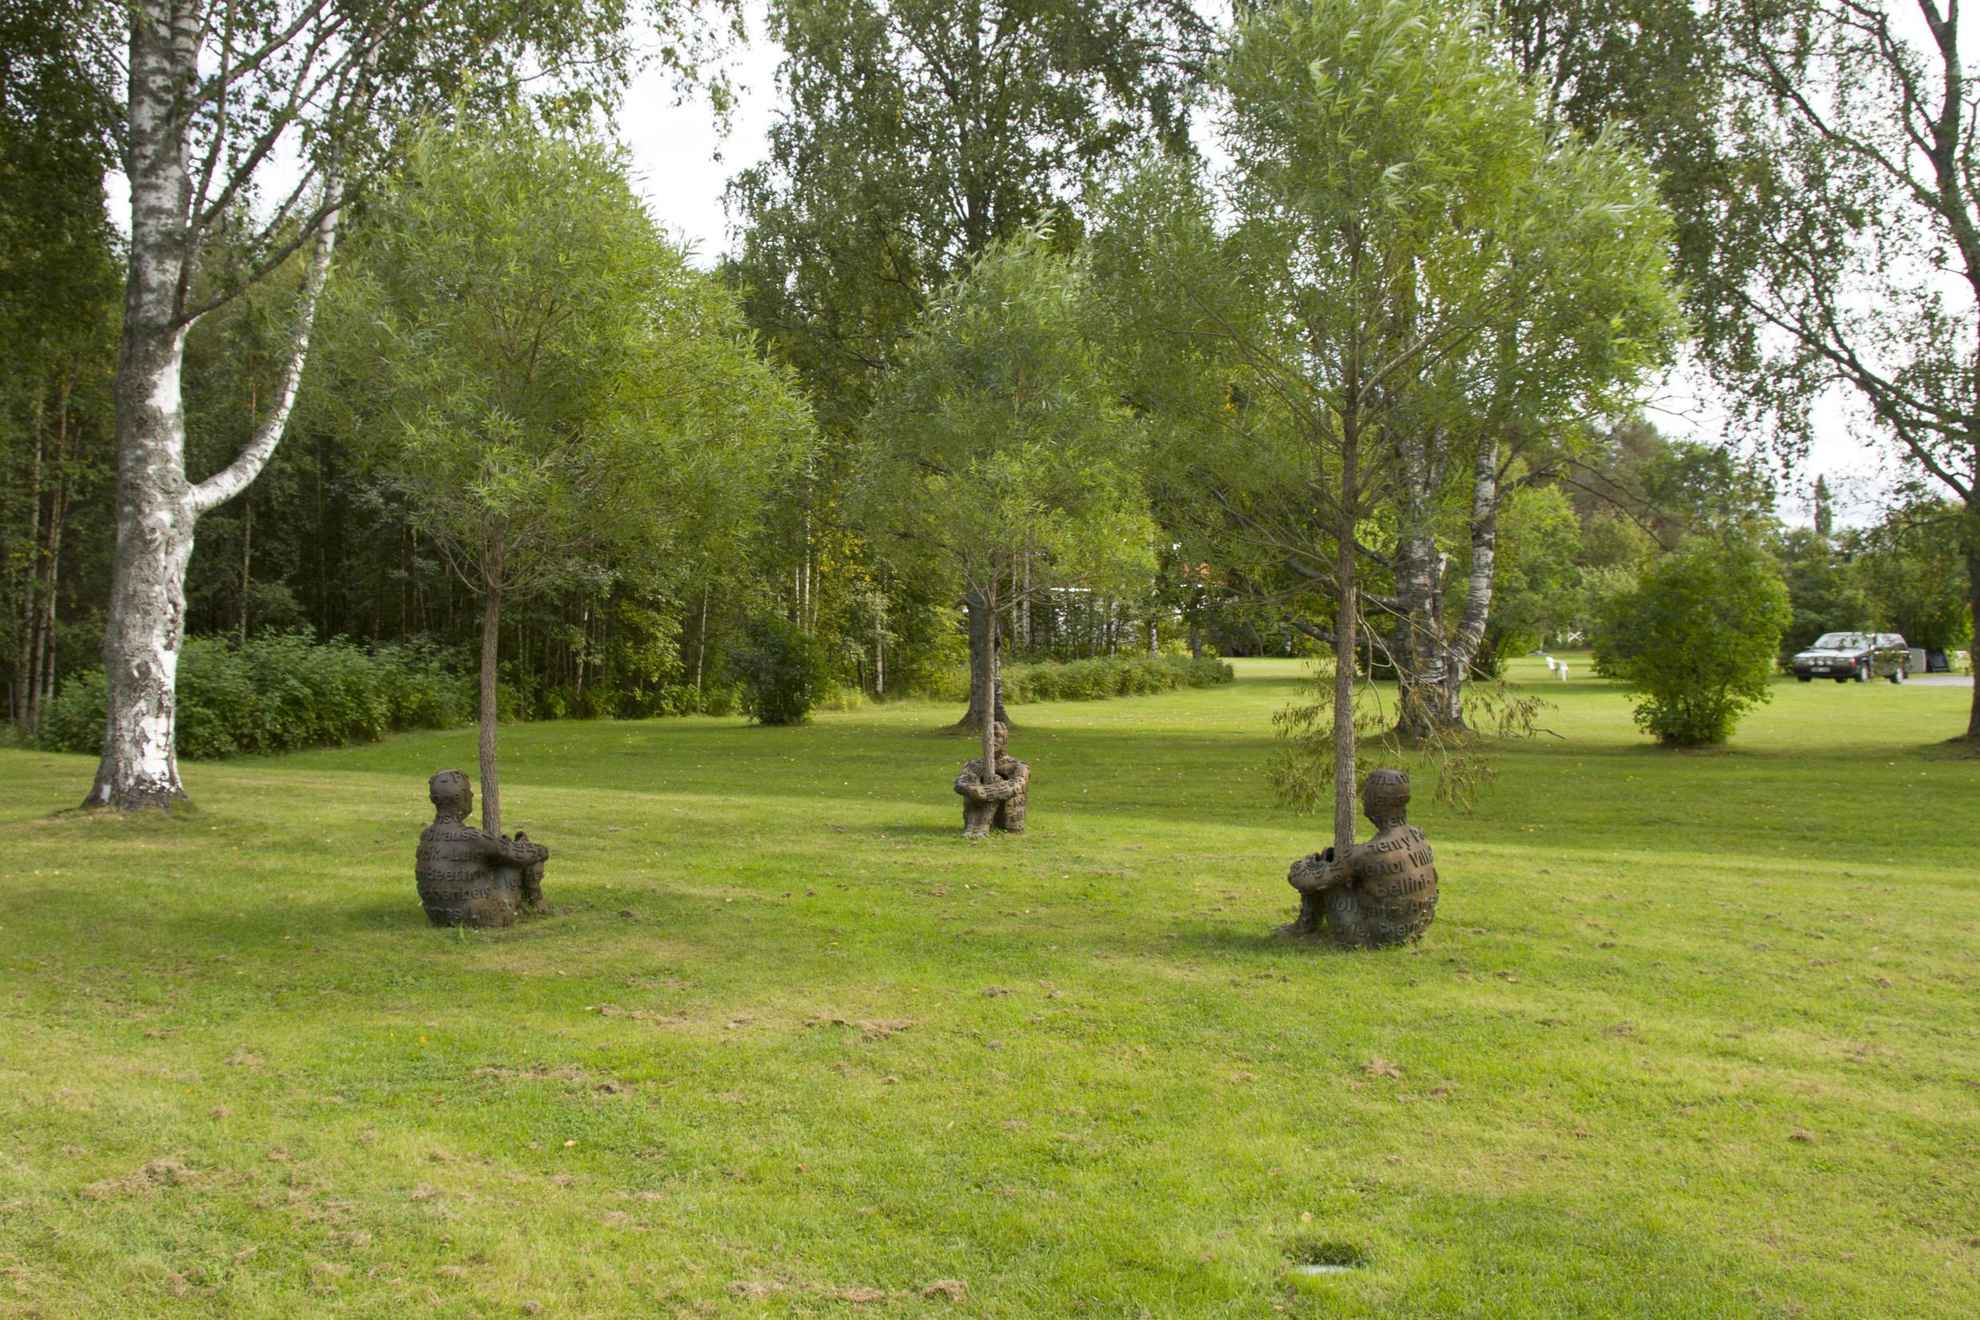 Sculptures named “Heart of Trees”, three people in bronze with their arms and legs wrapped around a tree trunk, in a sculpture park.